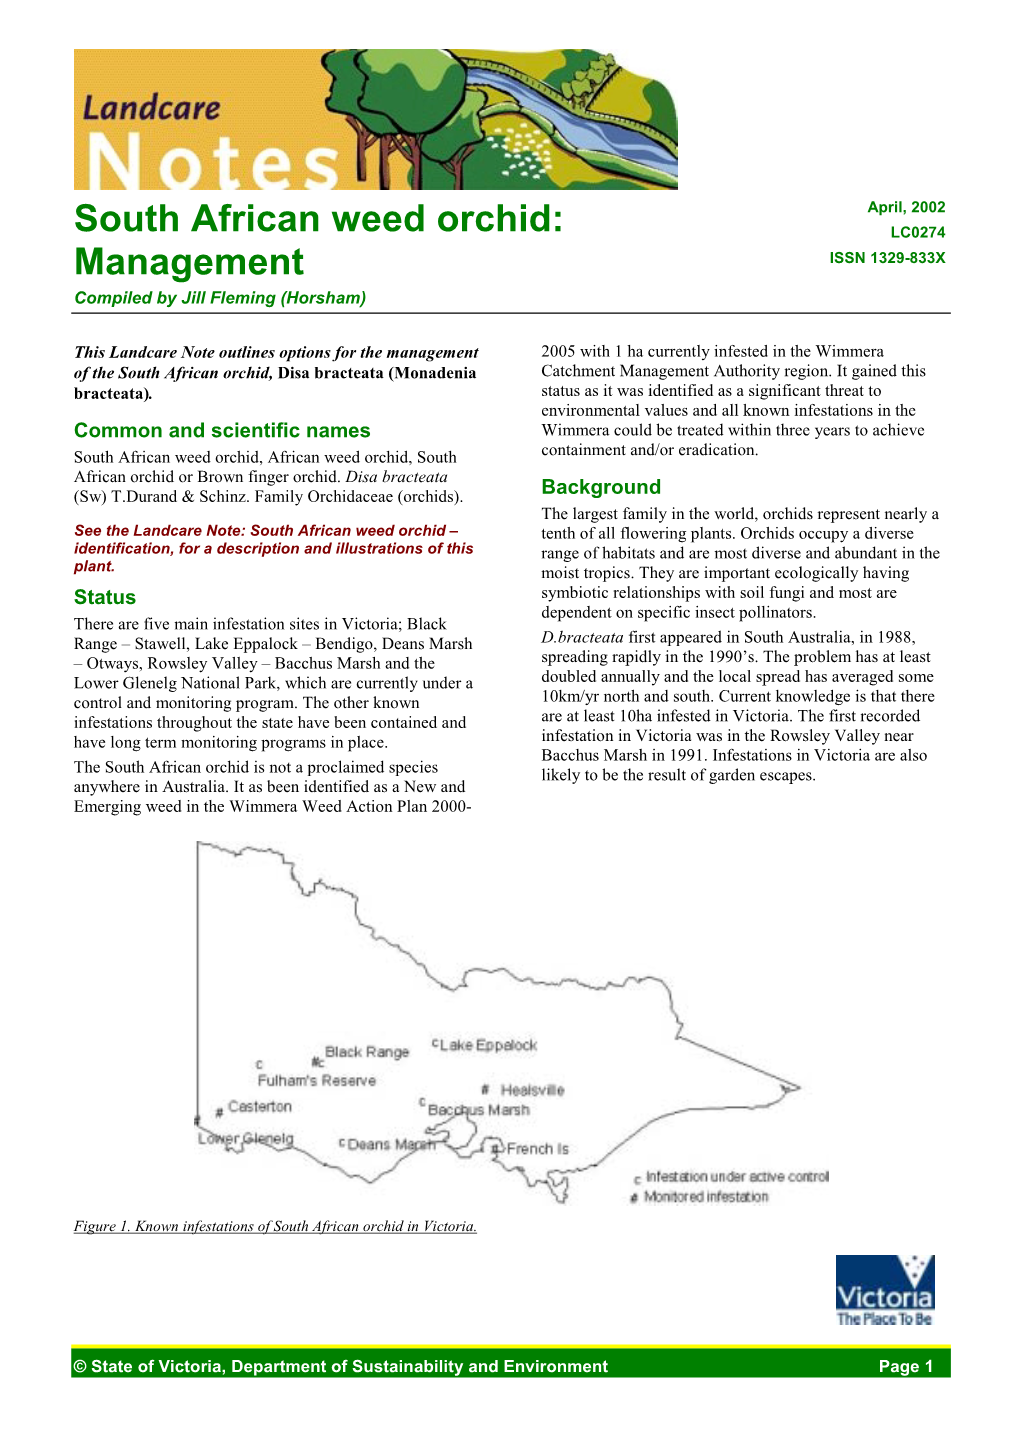 South African Weed Orchid 2: Management (DPI Vic)